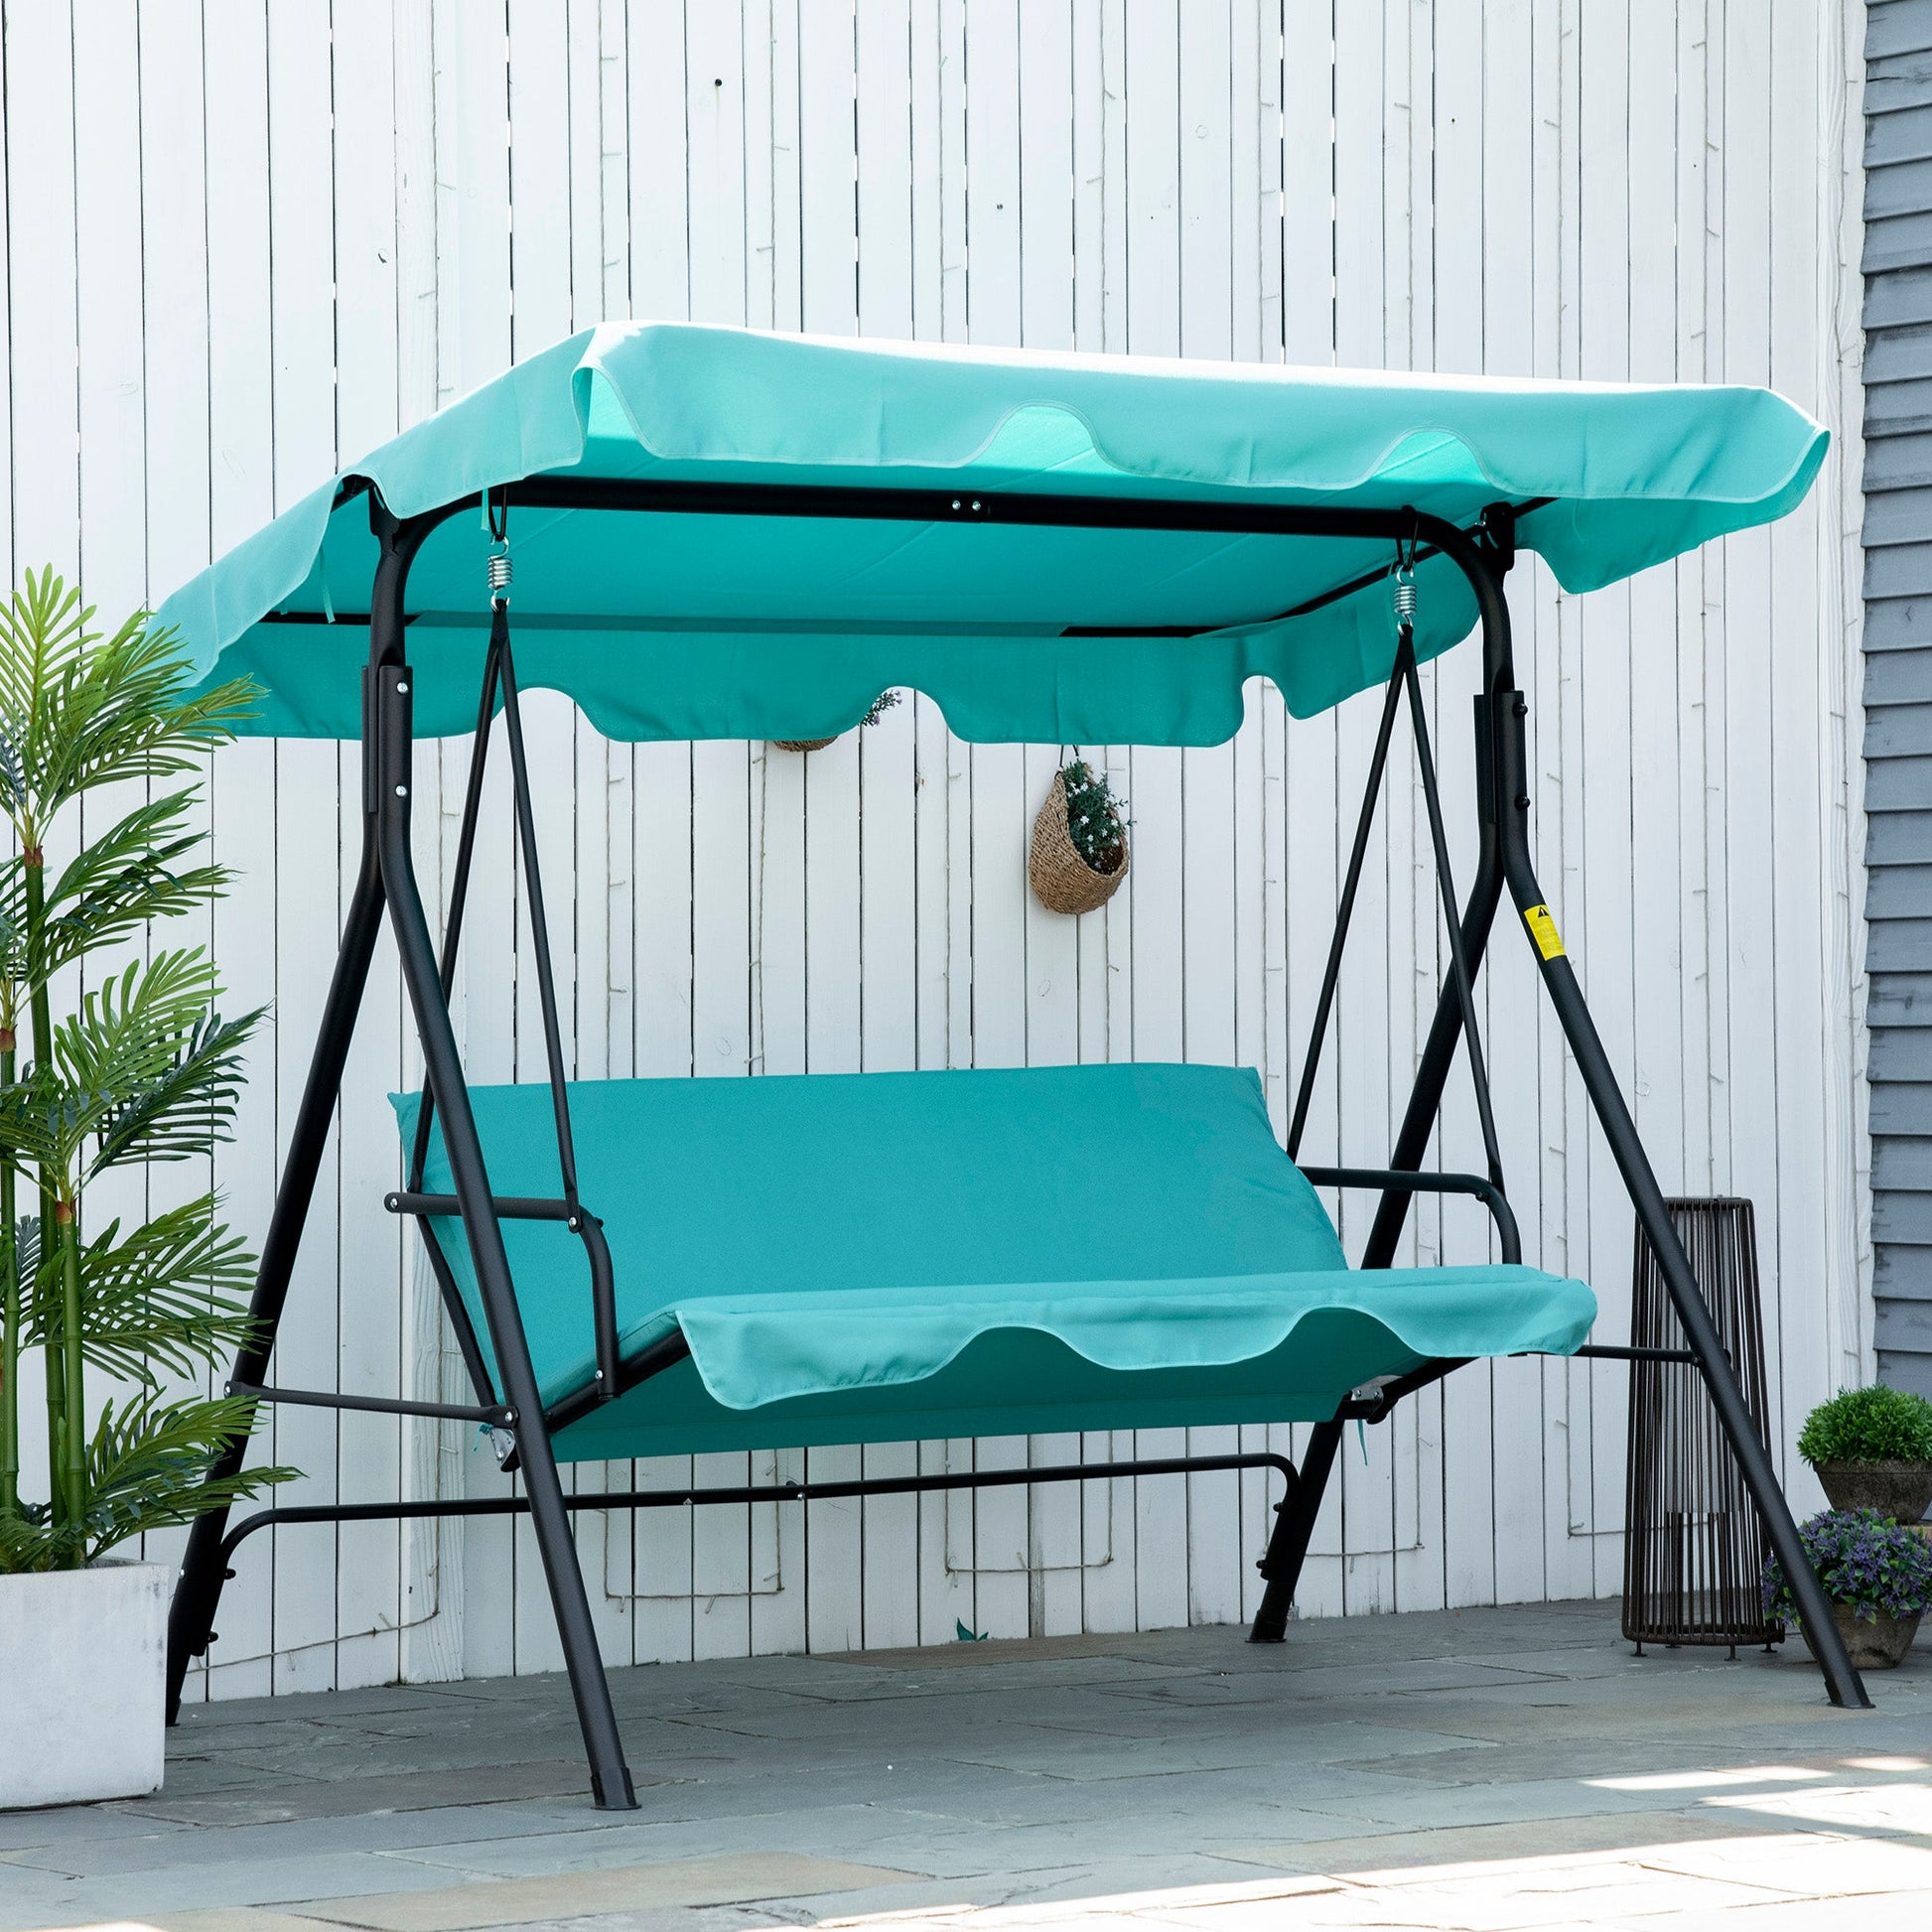 3-Seater Outdoor Porch Swing with Adjustable Canopy, Patio Swing Chair for Garden, Poolside, Backyard, Teal at Gallery Canada